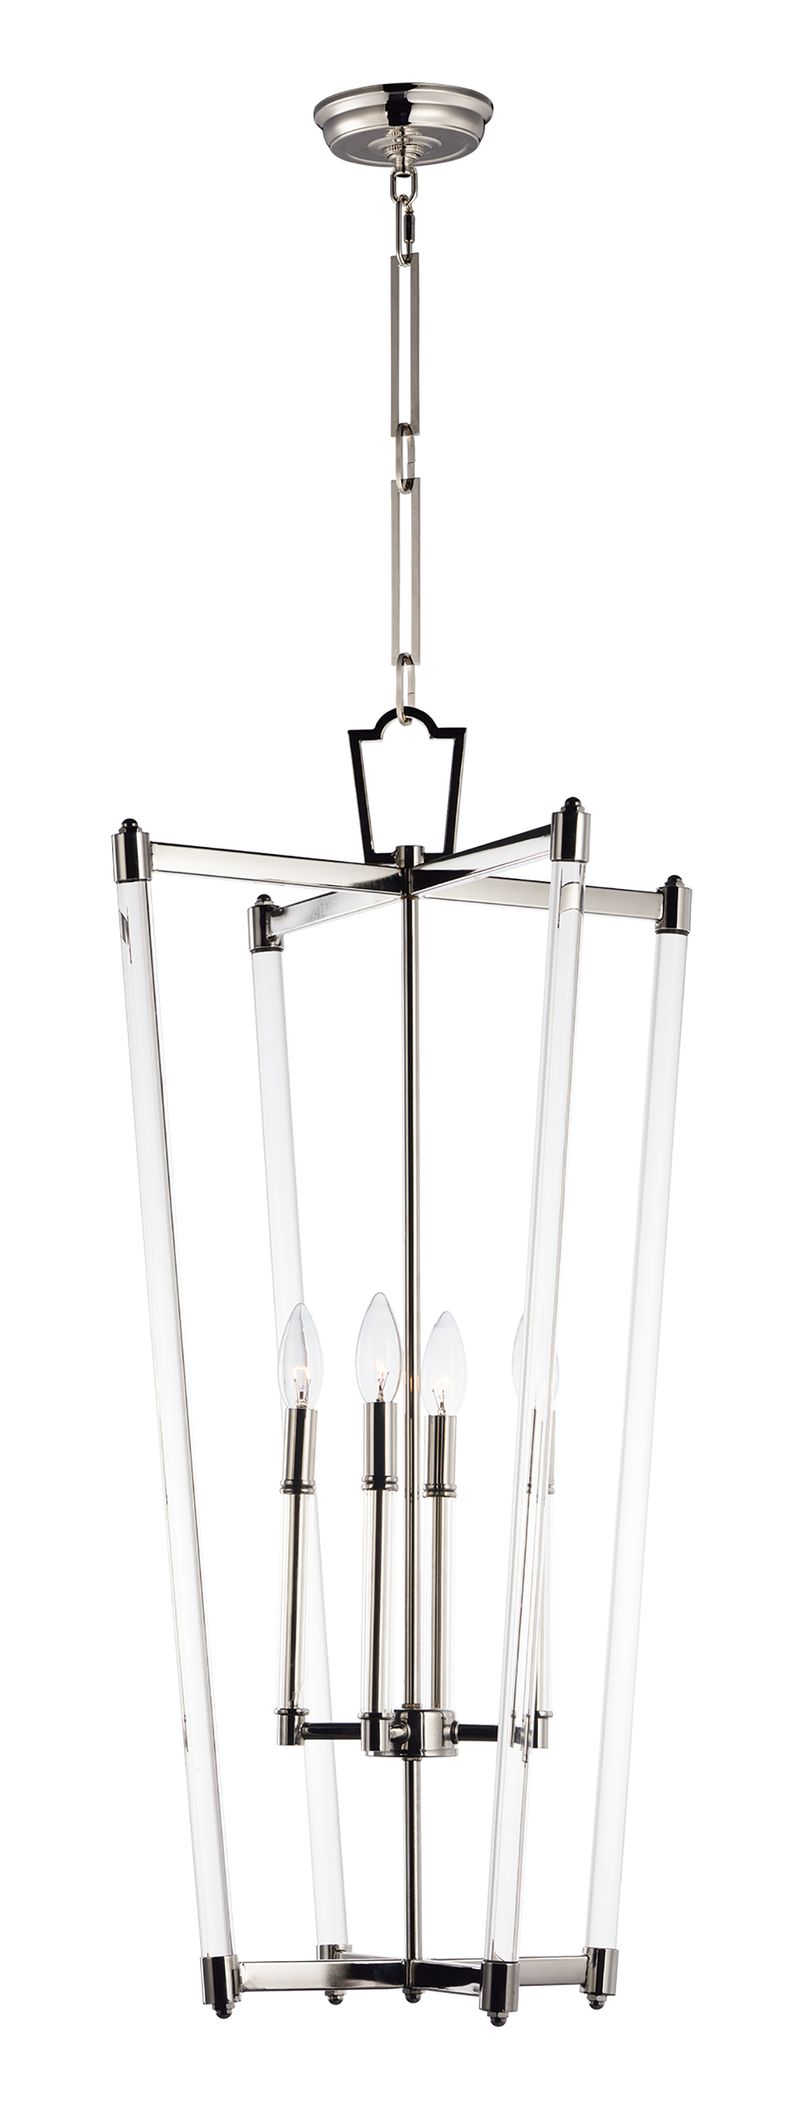 Lucent 17.5' 4 Light Entry Foyer Pendant in Polished Nickel